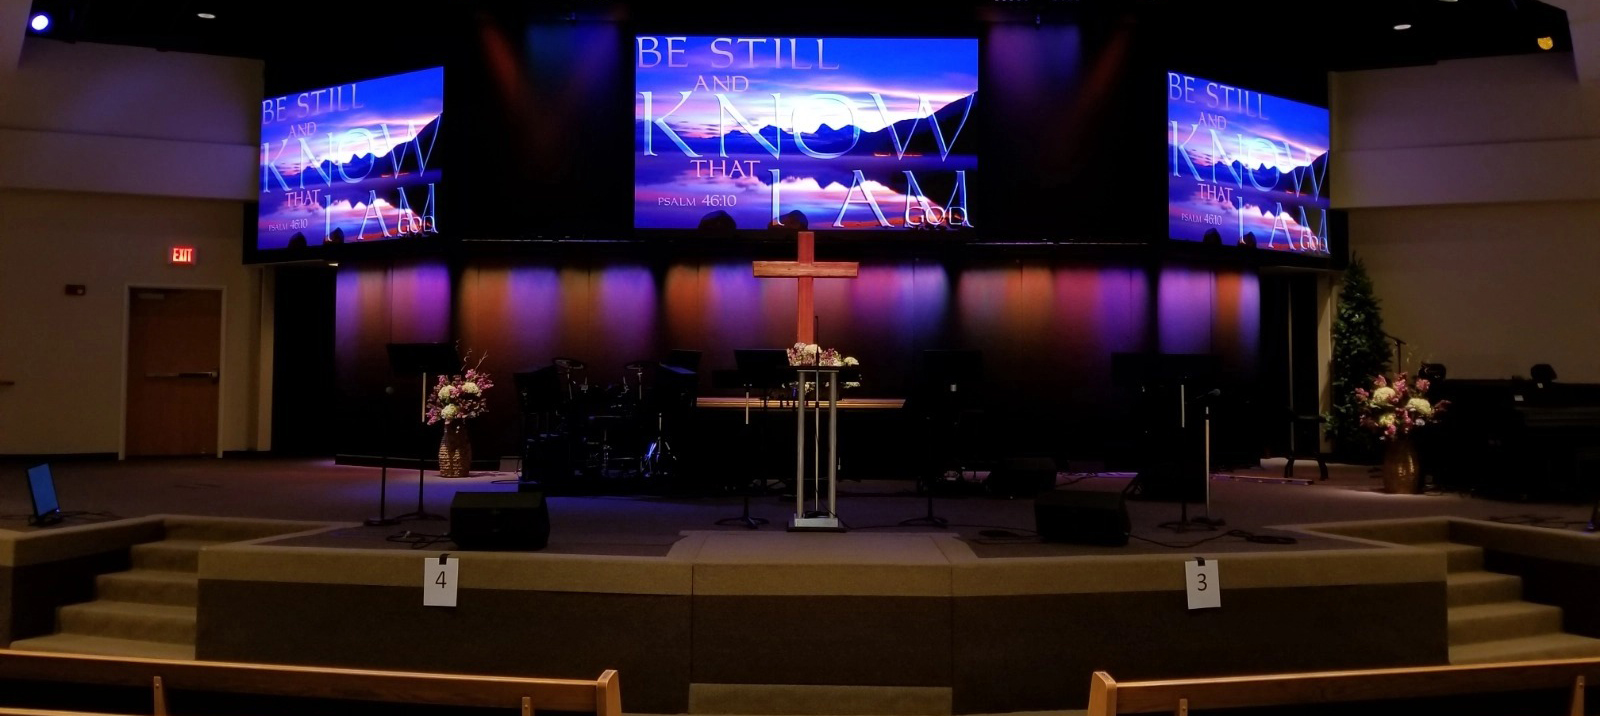 front-service led display for church